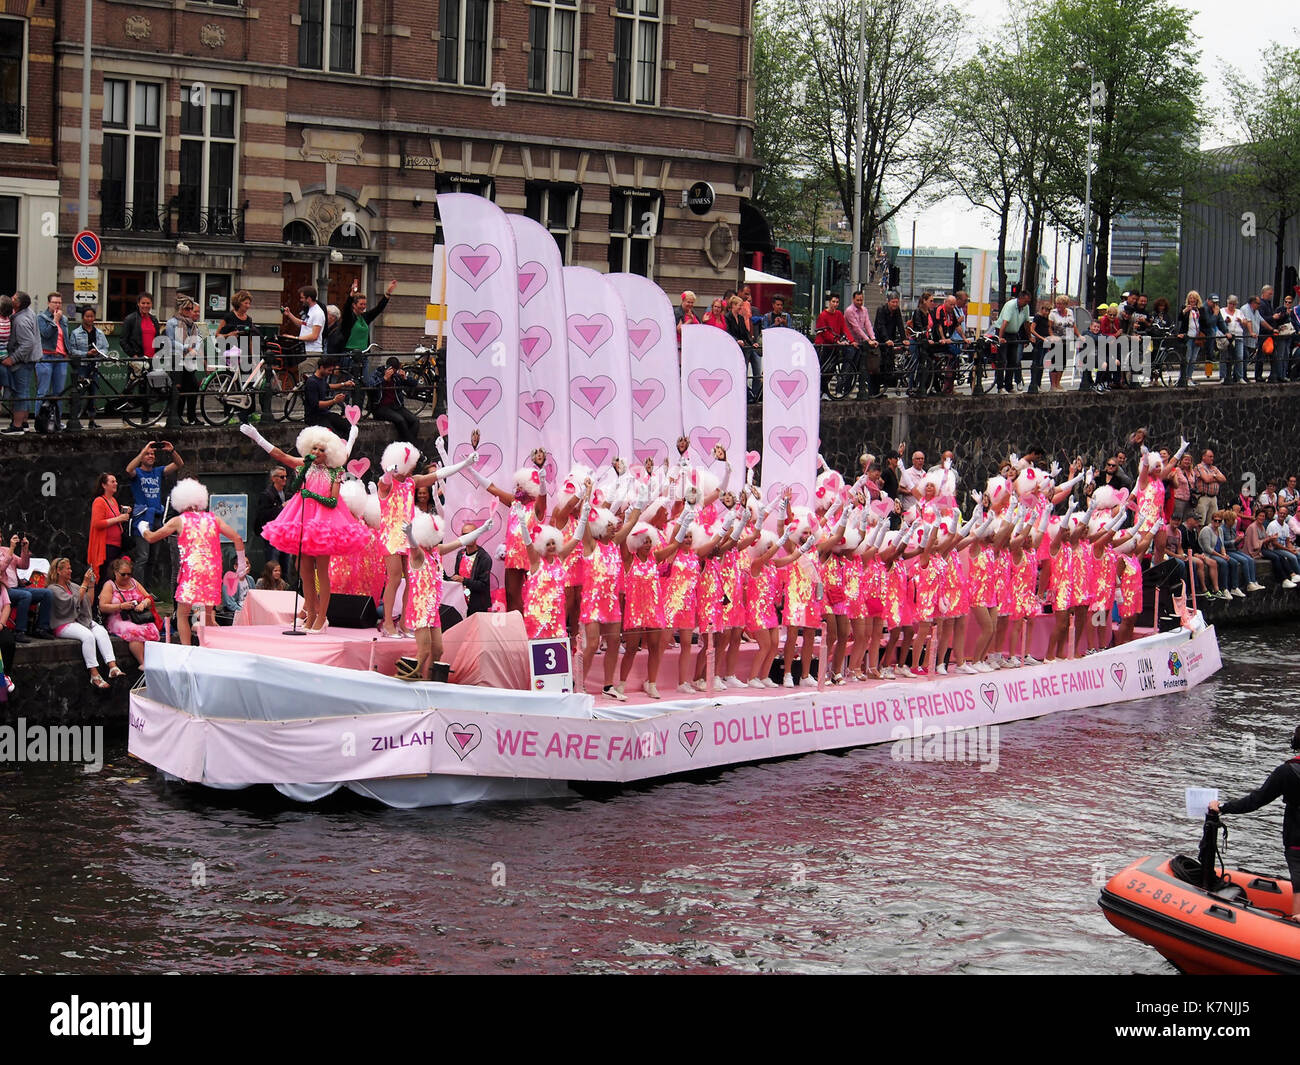 Boat 3 Dolly Bellefleur & Friends, Canal Parade Amsterdam 2017 foto 1 Stock Photo